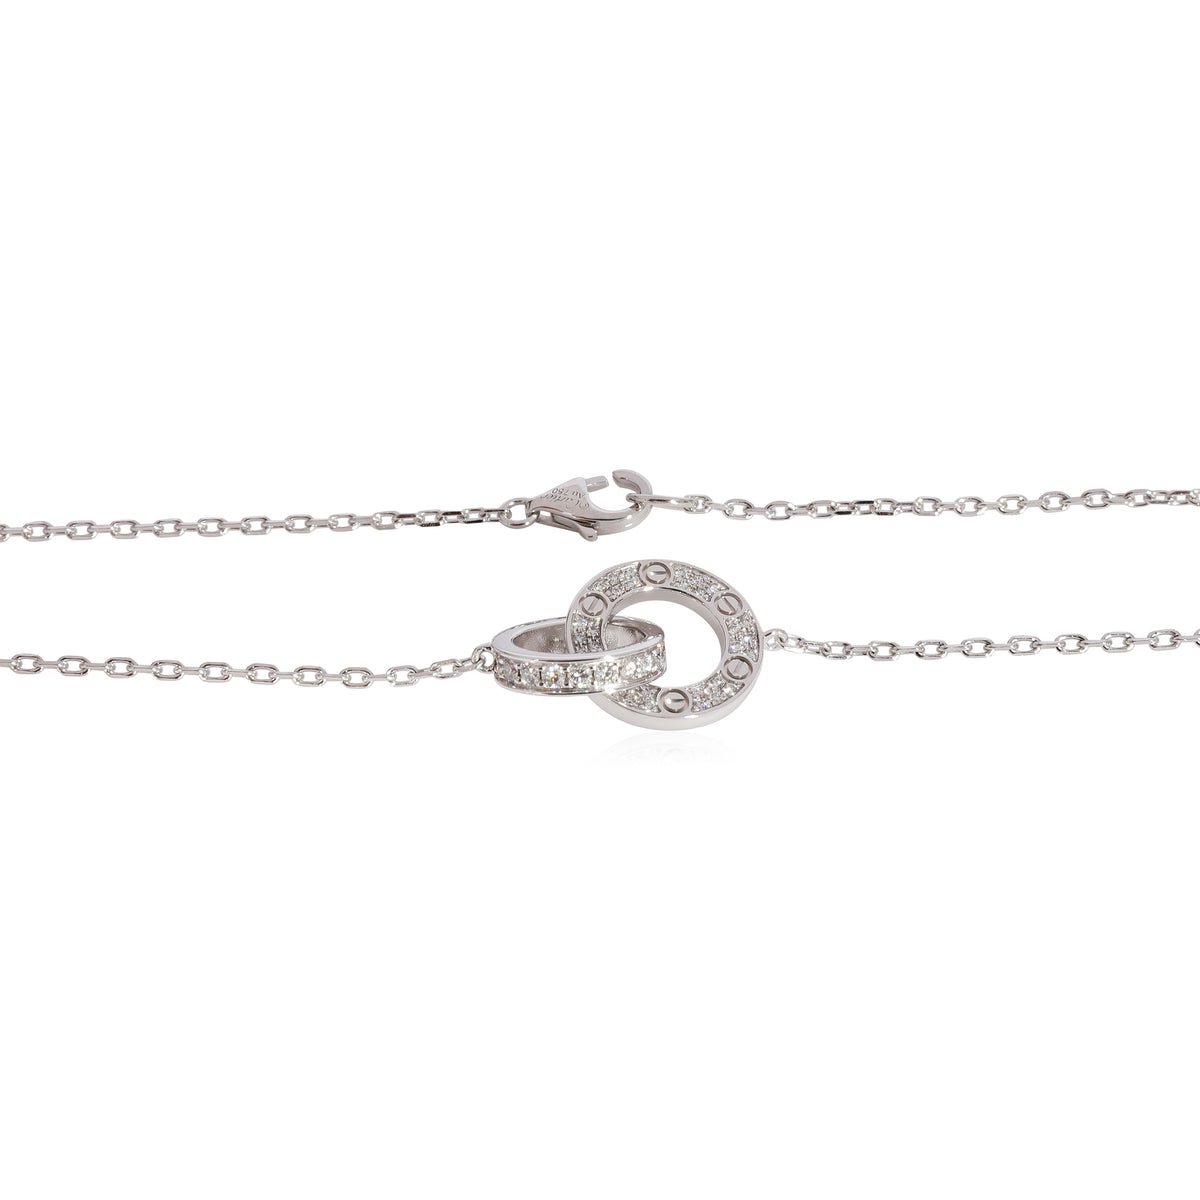 Cartier Love Paved Interlocking Circle Necklace in 18K White Gold 0.30 Ctw